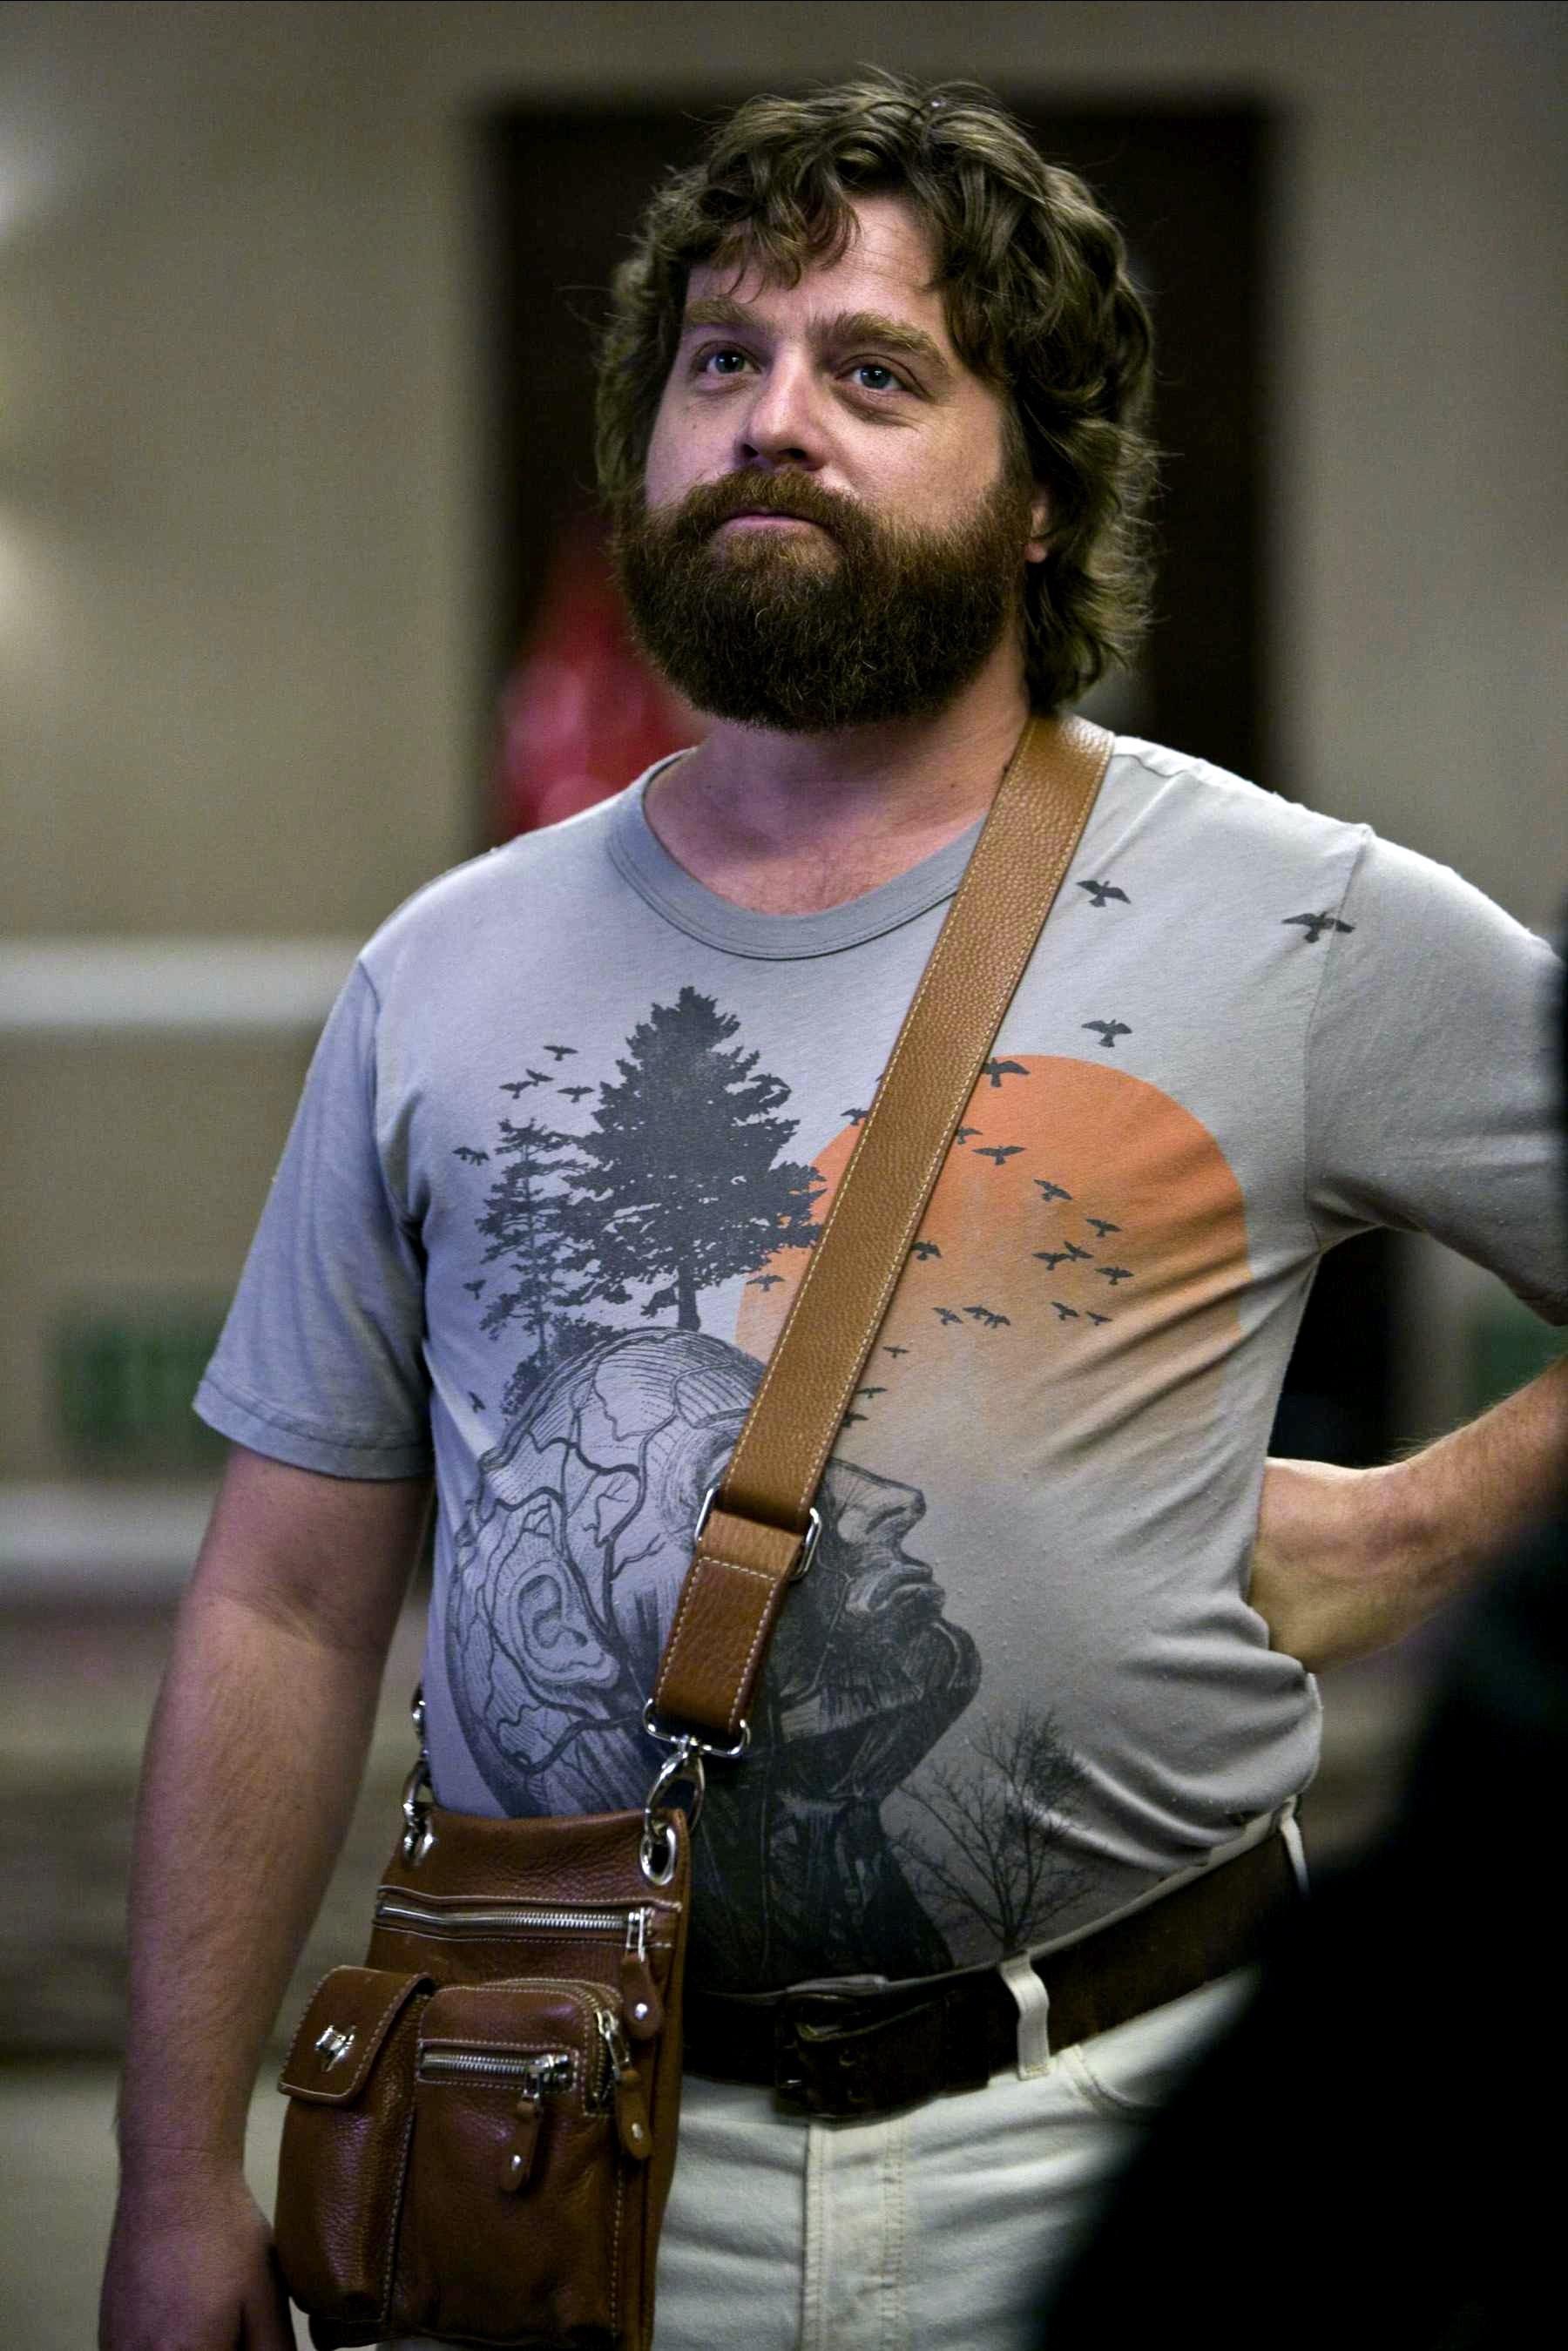 Zach Galifianakis Jokes His Kids 'Shall Never Know' He Starred In The Hangover